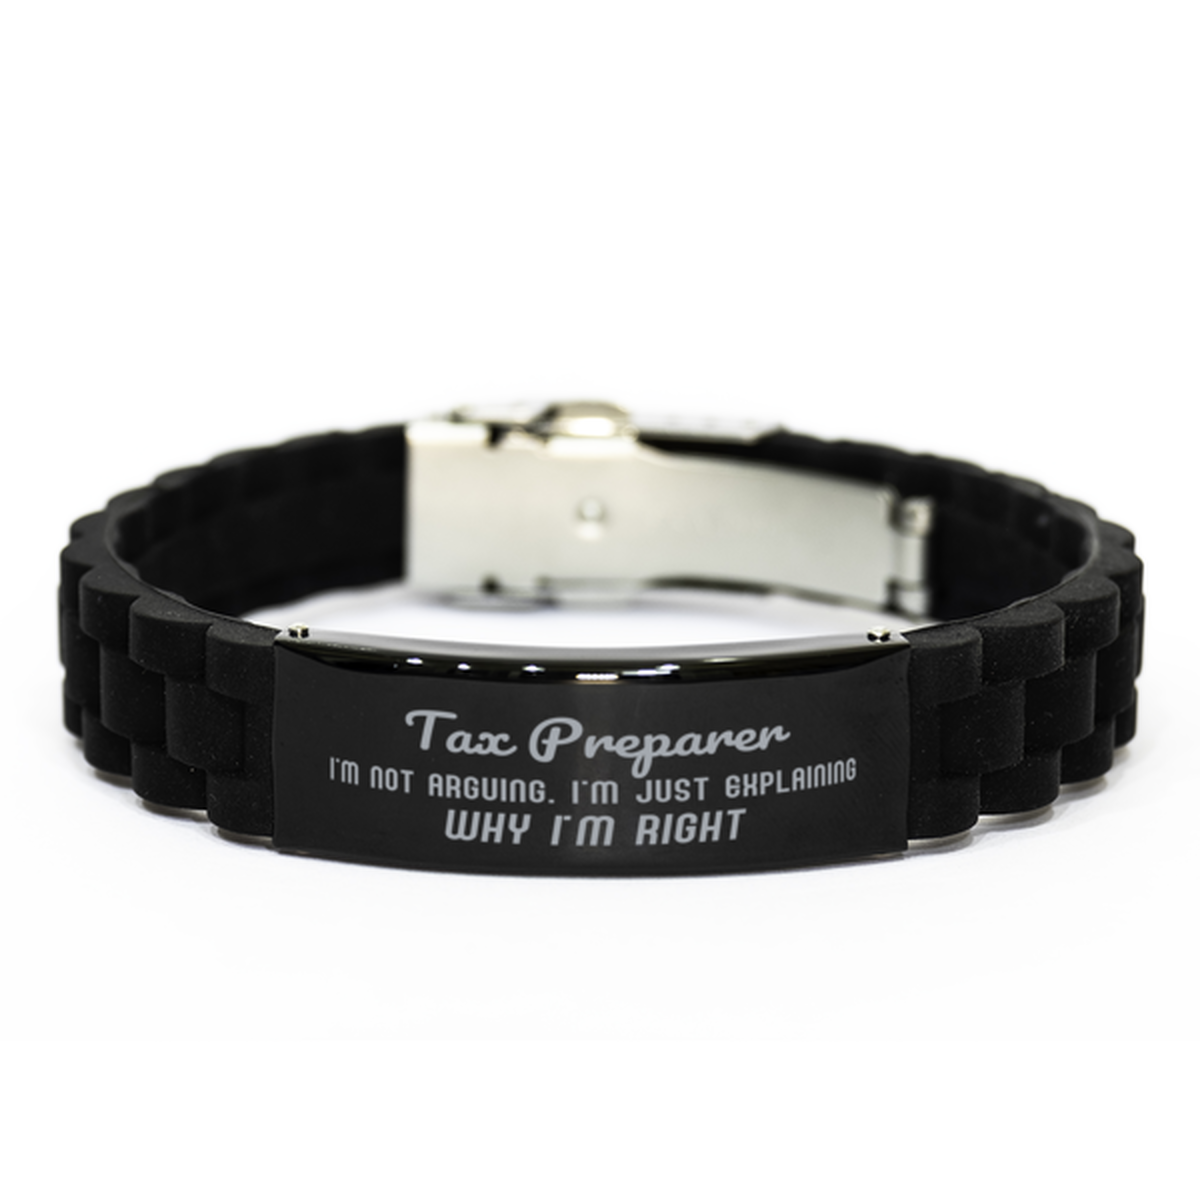 Tax Preparer I'm not Arguing. I'm Just Explaining Why I'm RIGHT Black Glidelock Clasp Bracelet, Funny Saying Quote Tax Preparer Gifts For Tax Preparer Graduation Birthday Christmas Gifts for Men Women Coworker